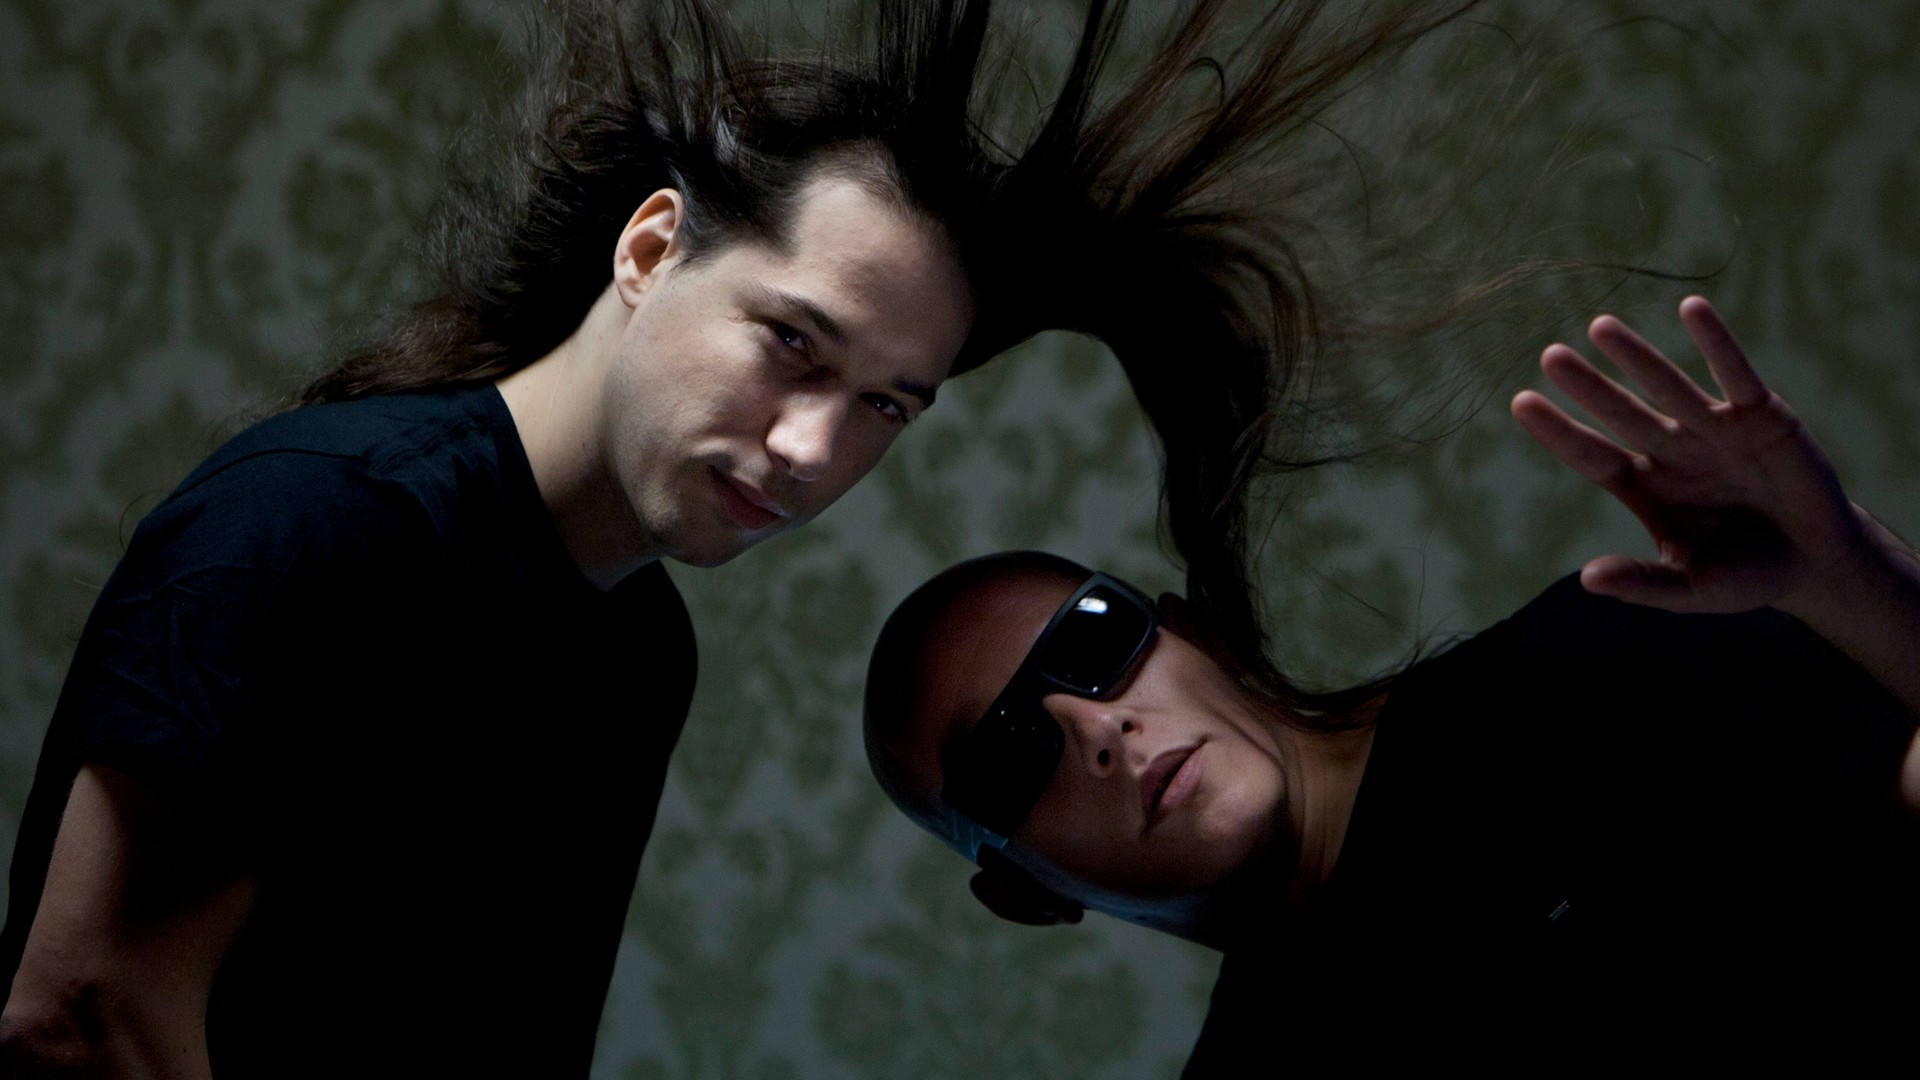 1920x1080  Wallpaper infected mushroom, band, faces, hair, glasses